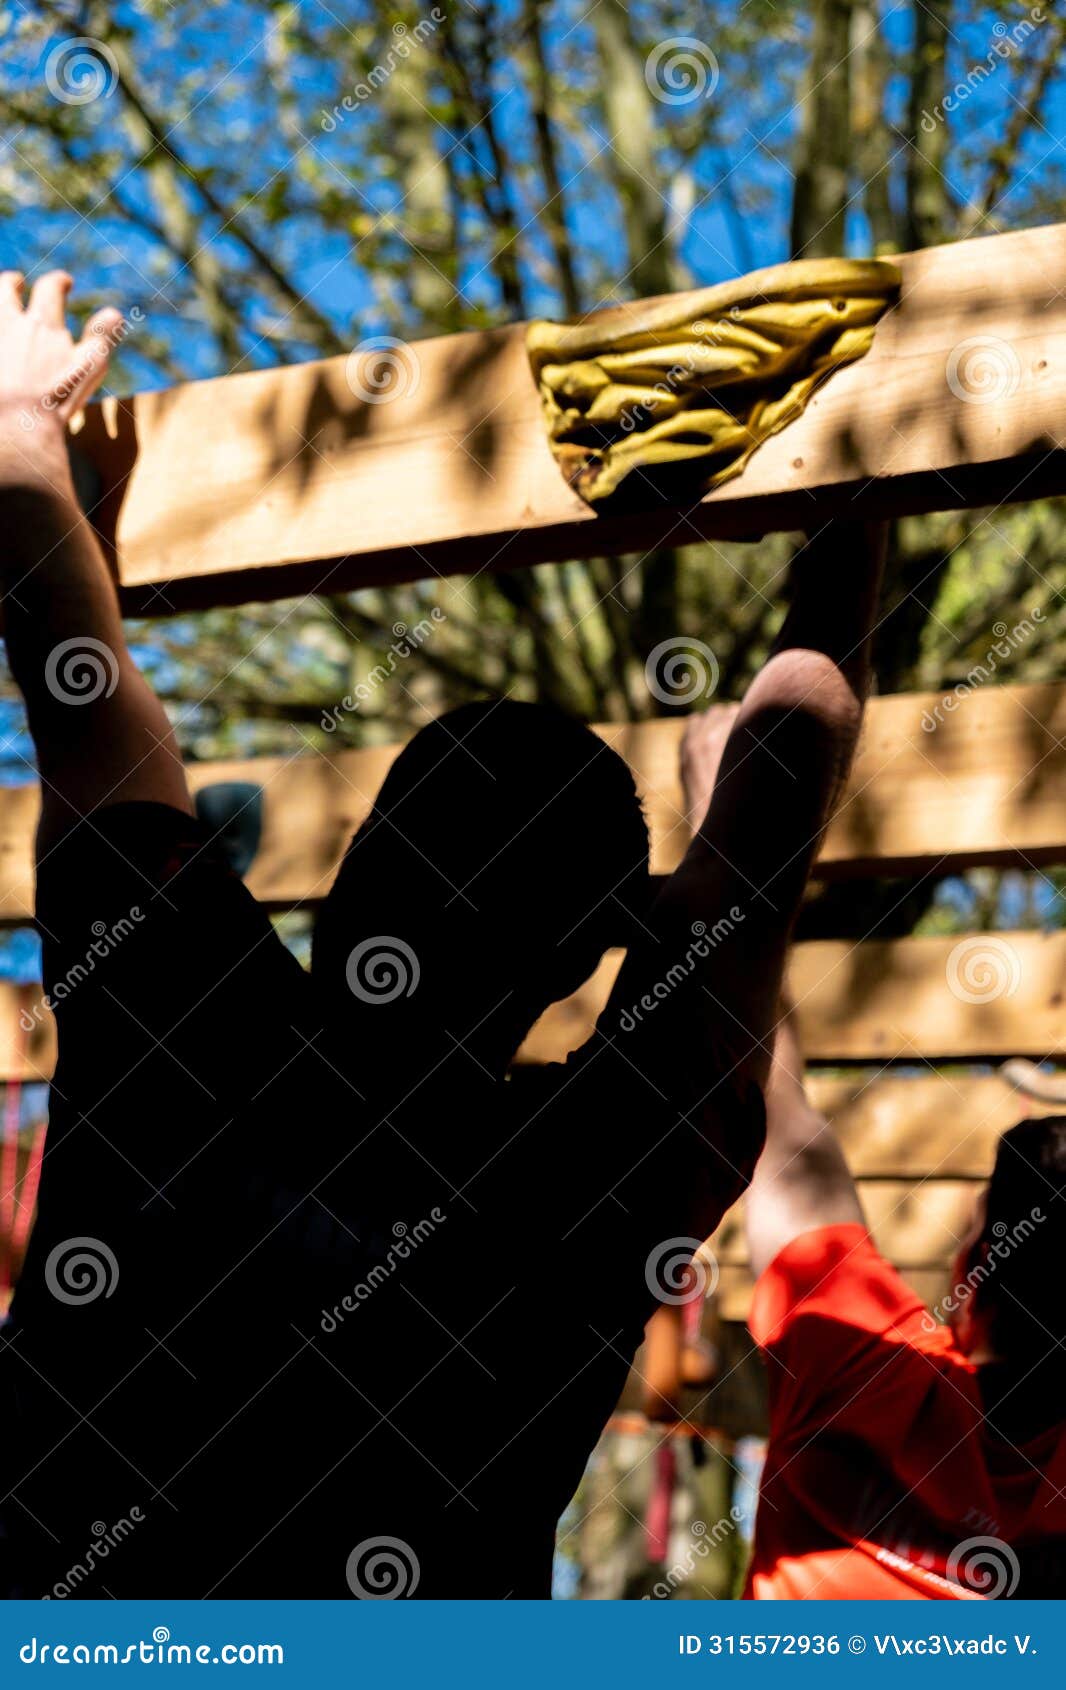 selective focus, athletes hands at a hanging obstacle at an obstacle course race, ocr competition